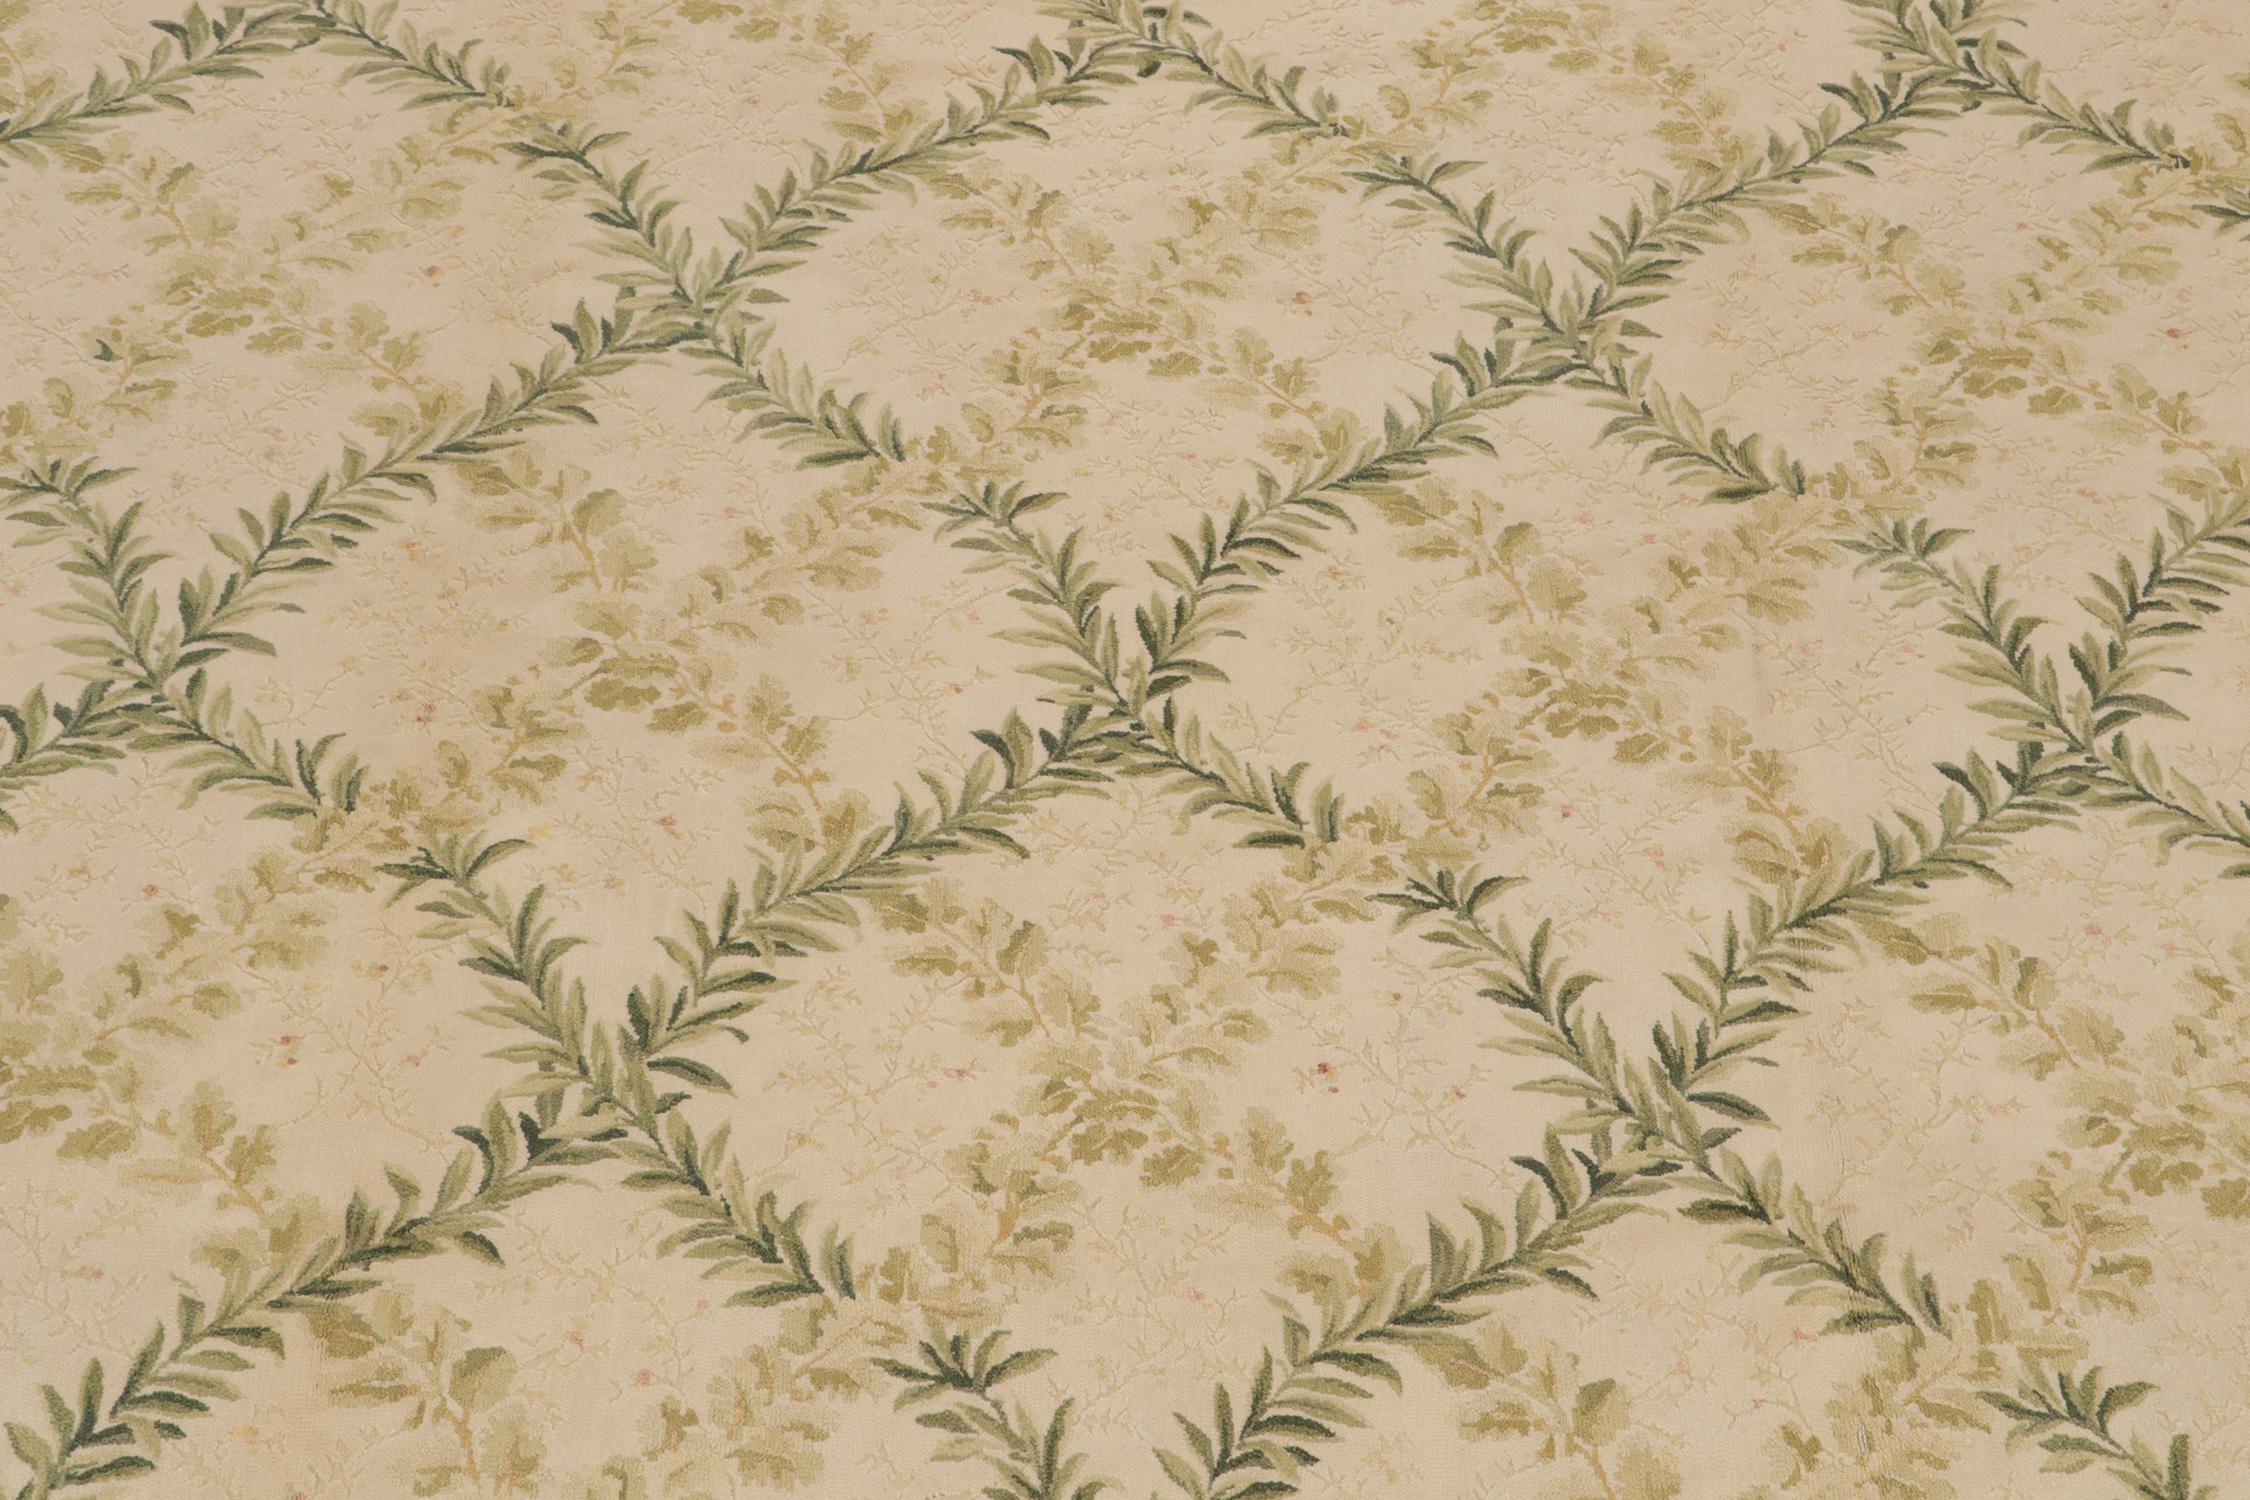 Rug & Kilim’s Tudor Style Flat Weave in Green and Cream Trellis Floral Patterns In New Condition For Sale In Long Island City, NY